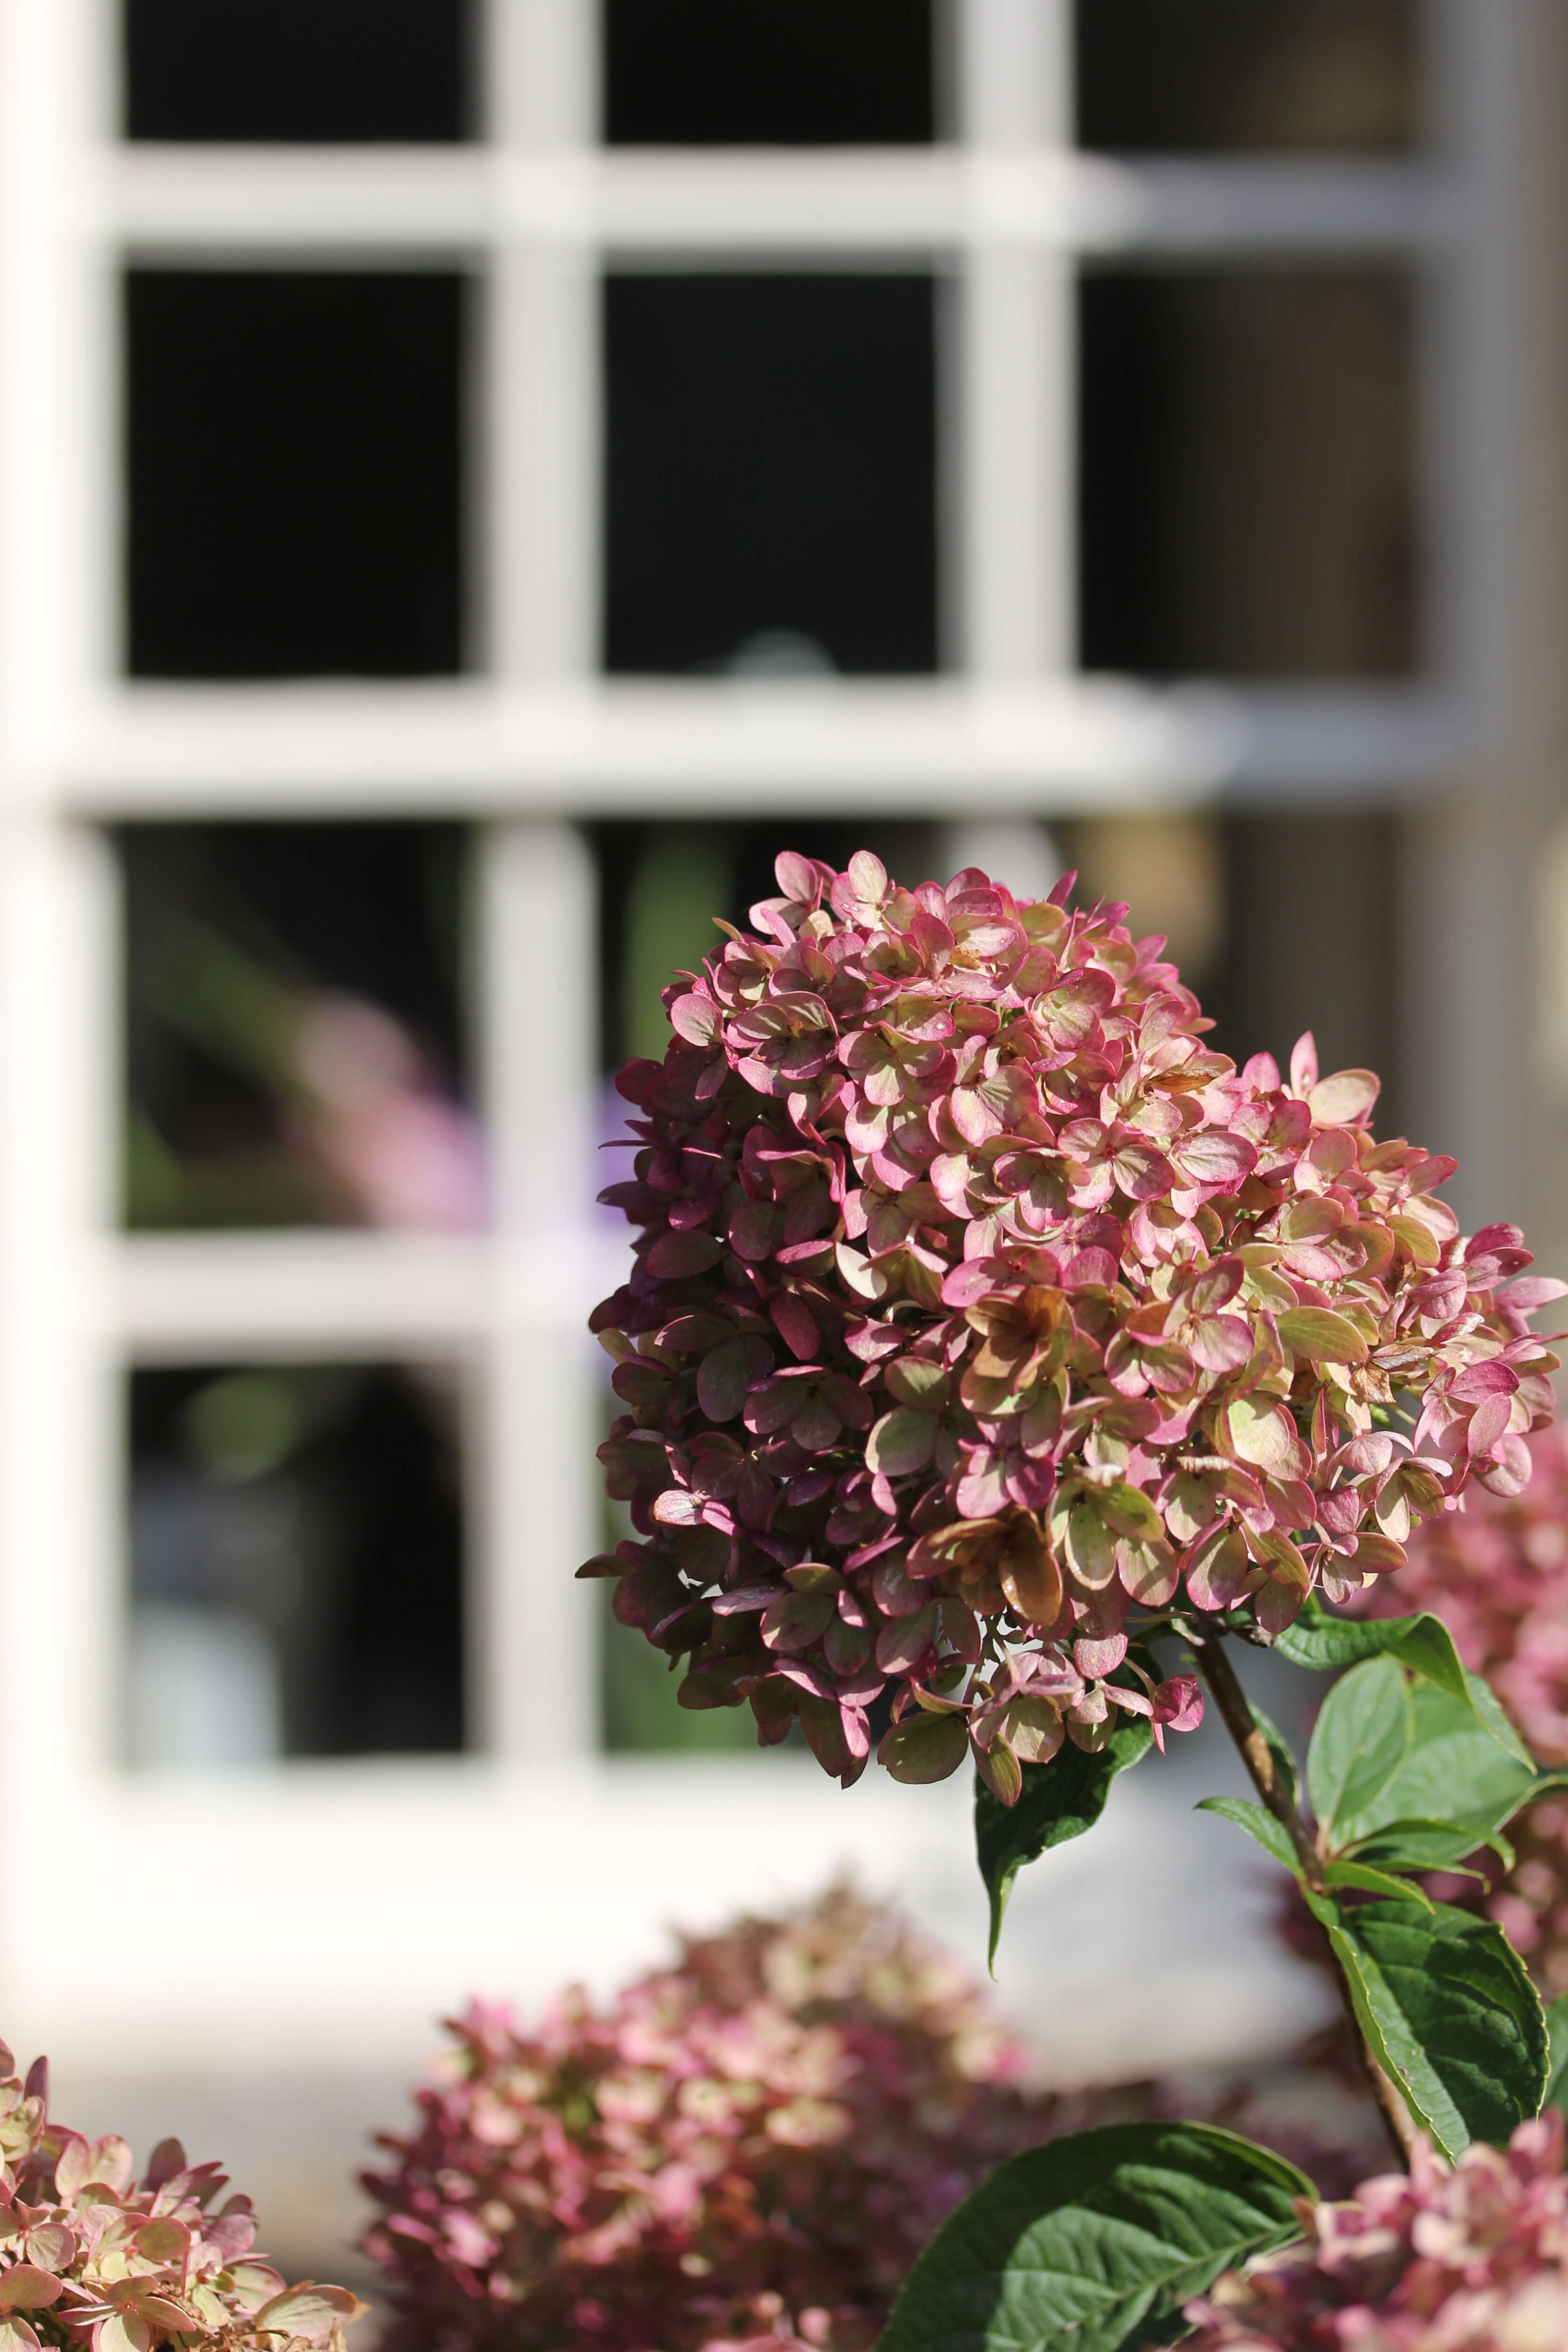 Hydrangea flower in autumn turning rustic infant of a window